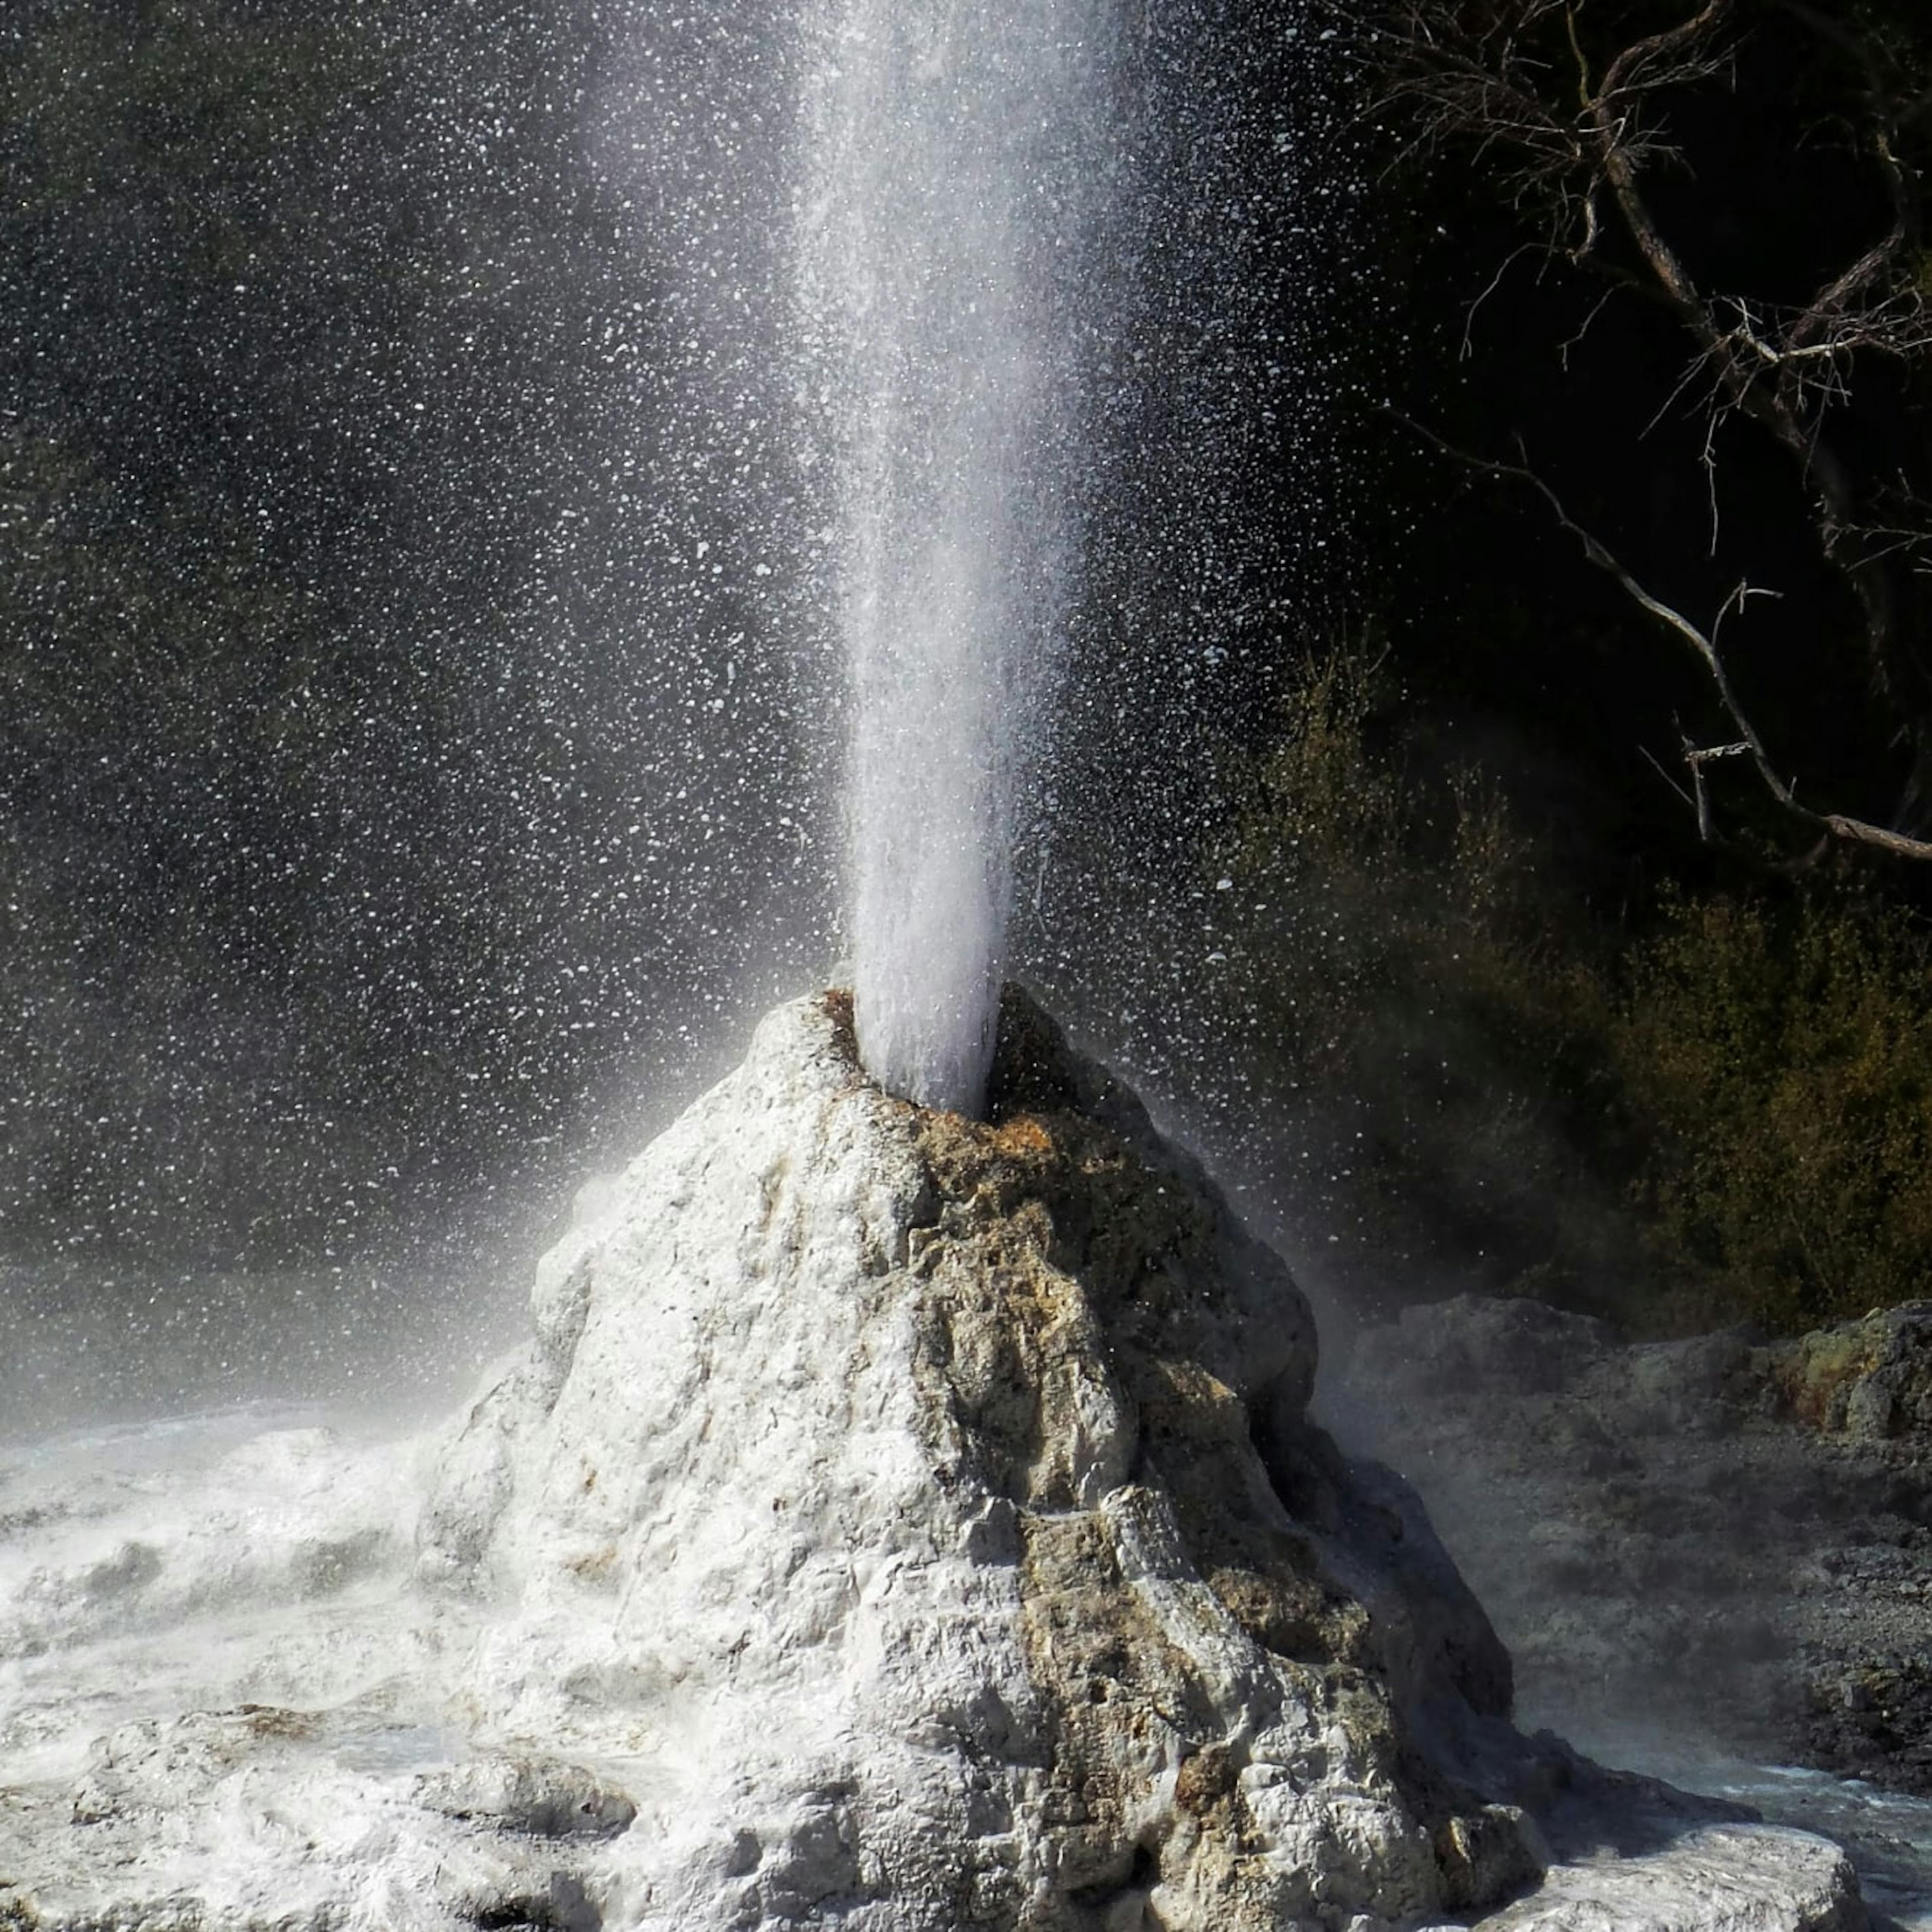 A person with ADHD's emotions are like a geyser.